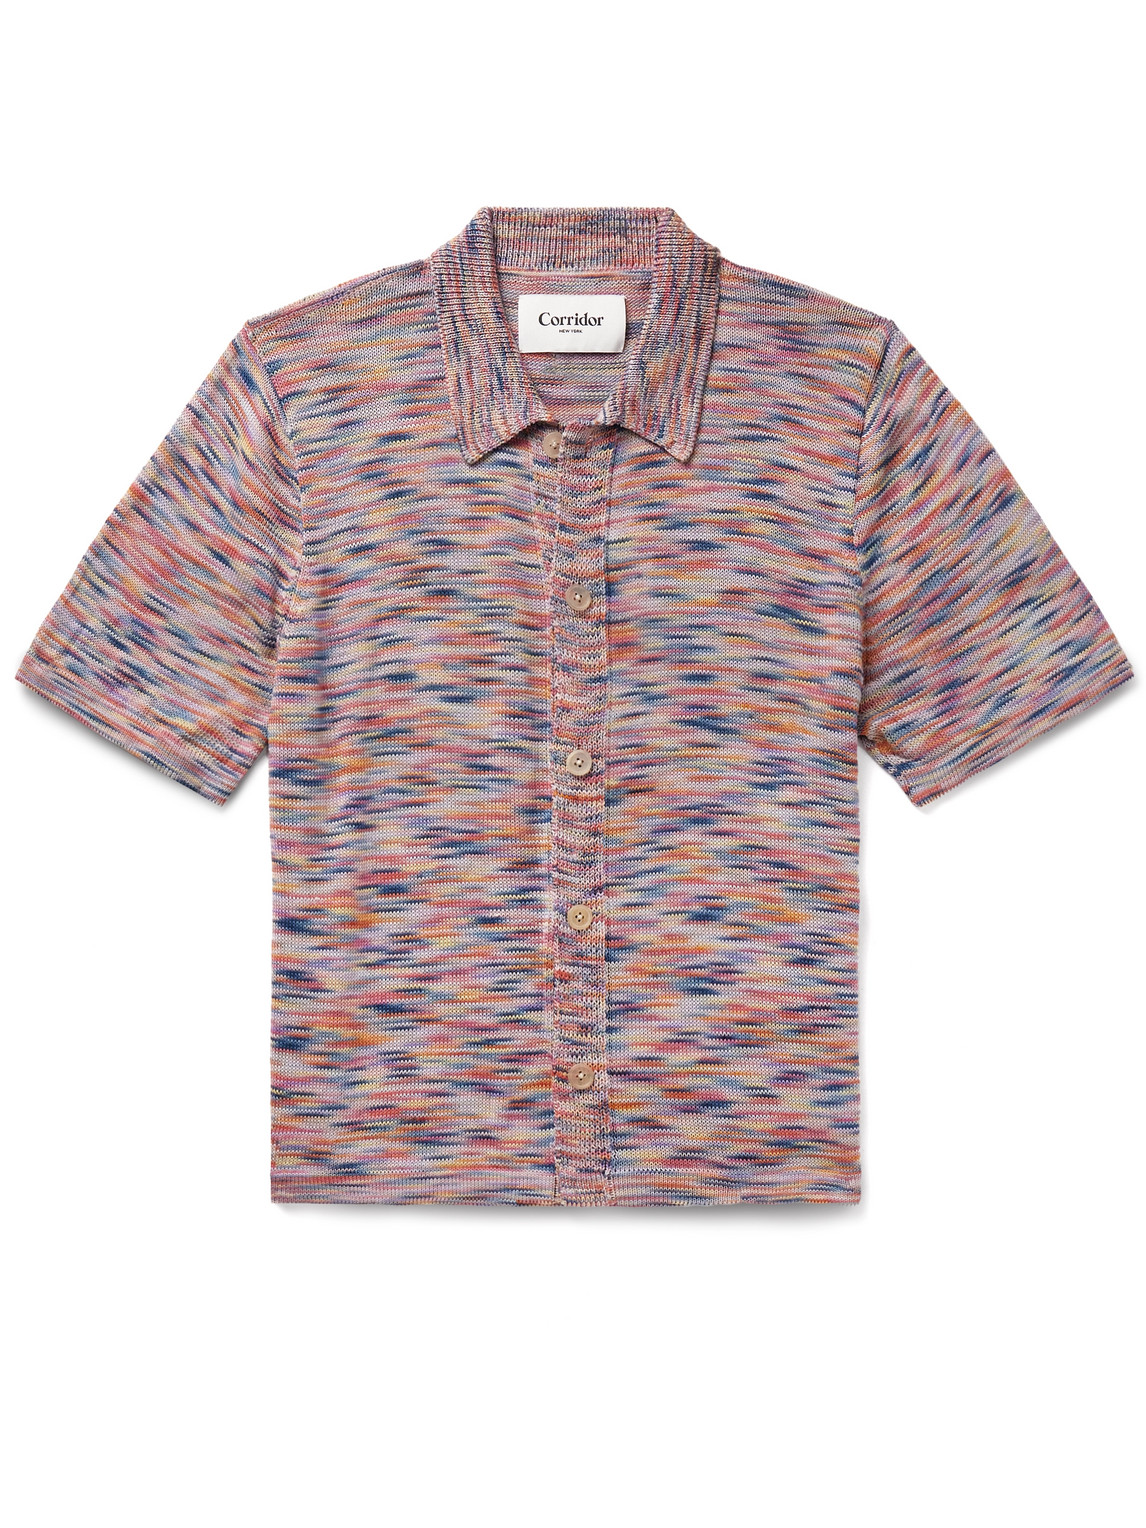 Corridor Space-dyed Cotton Shirt In Pink